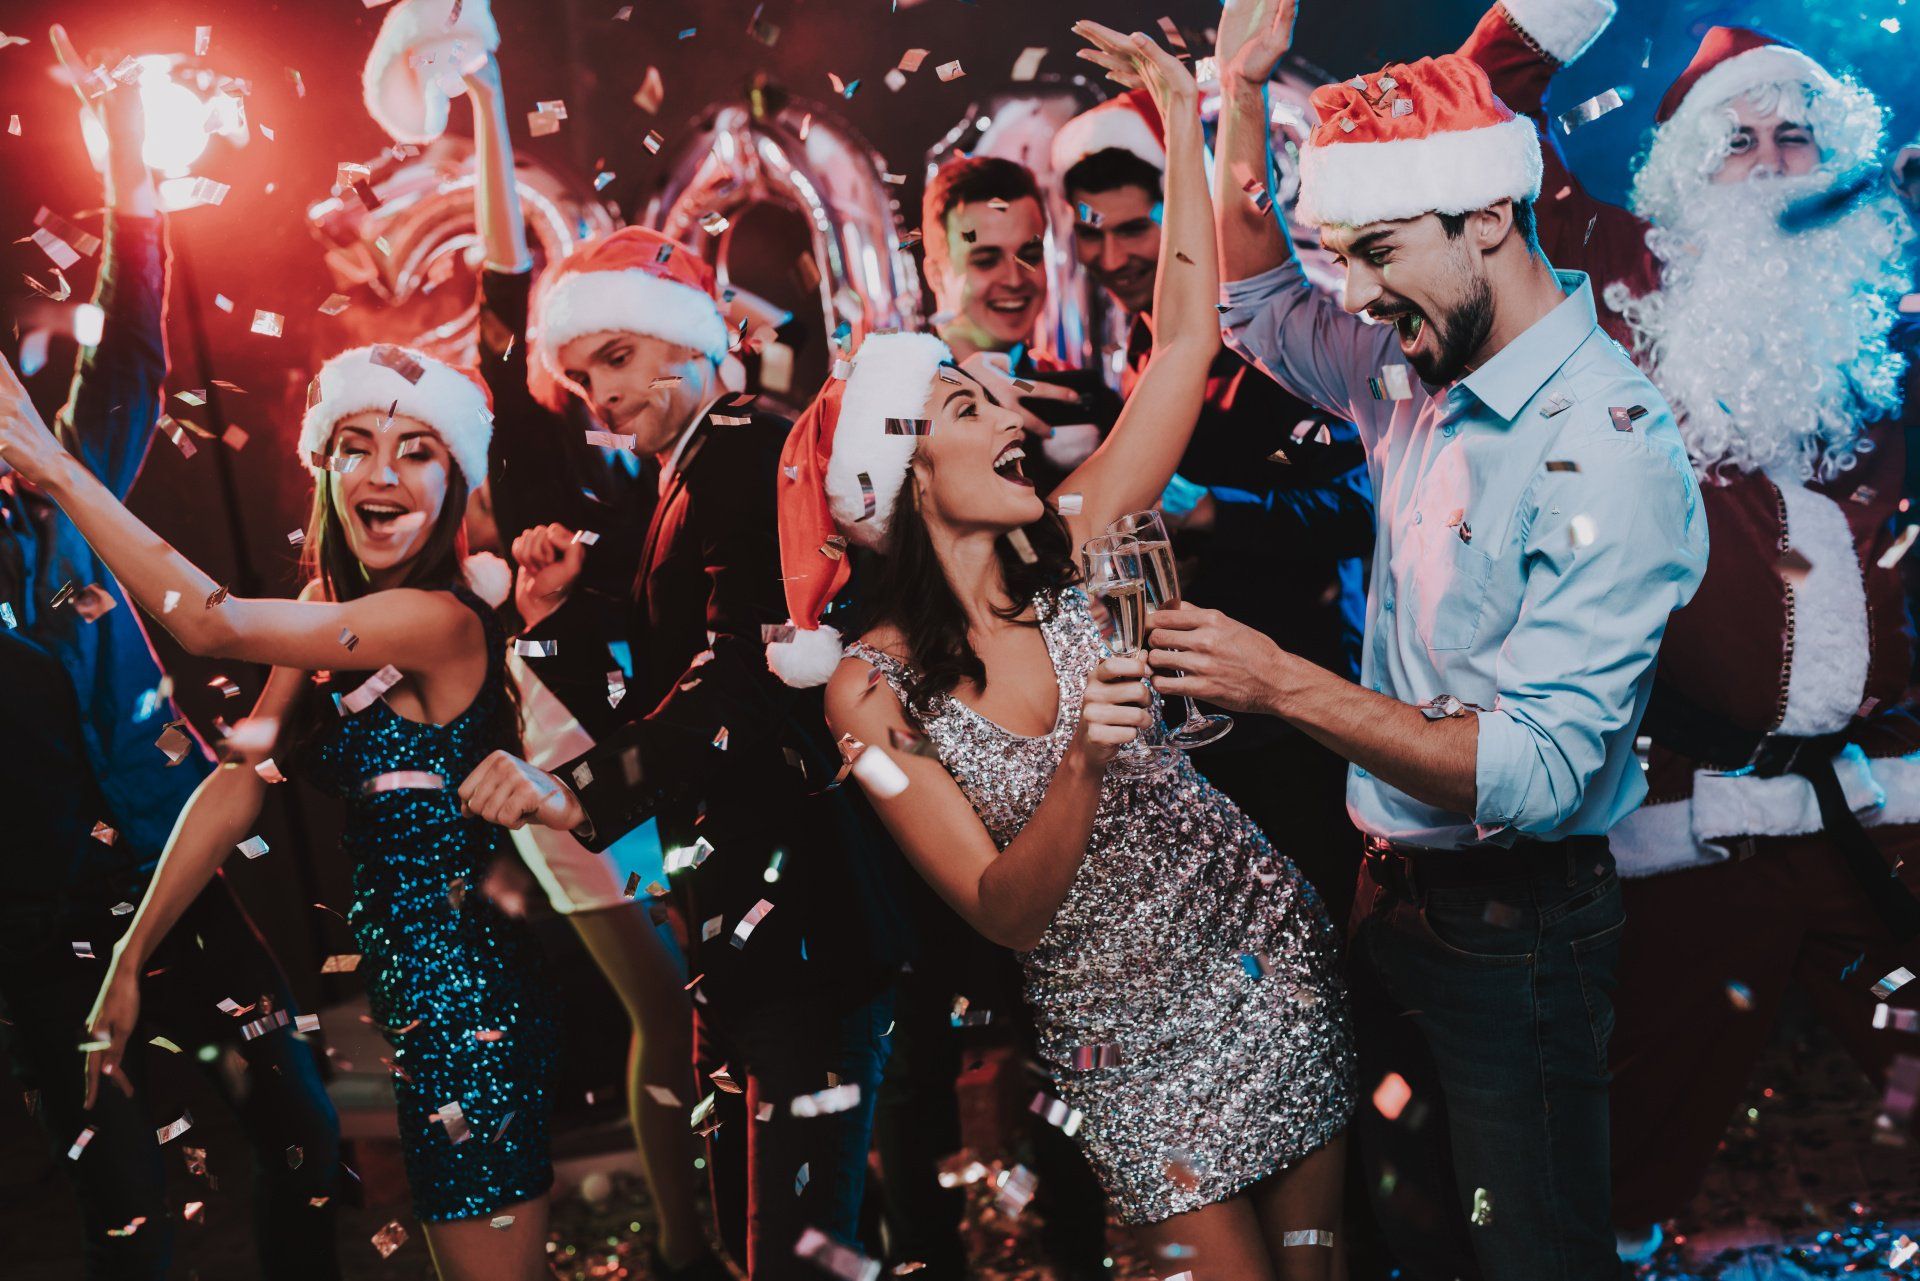 People dancing and drinking at a Christmas party.